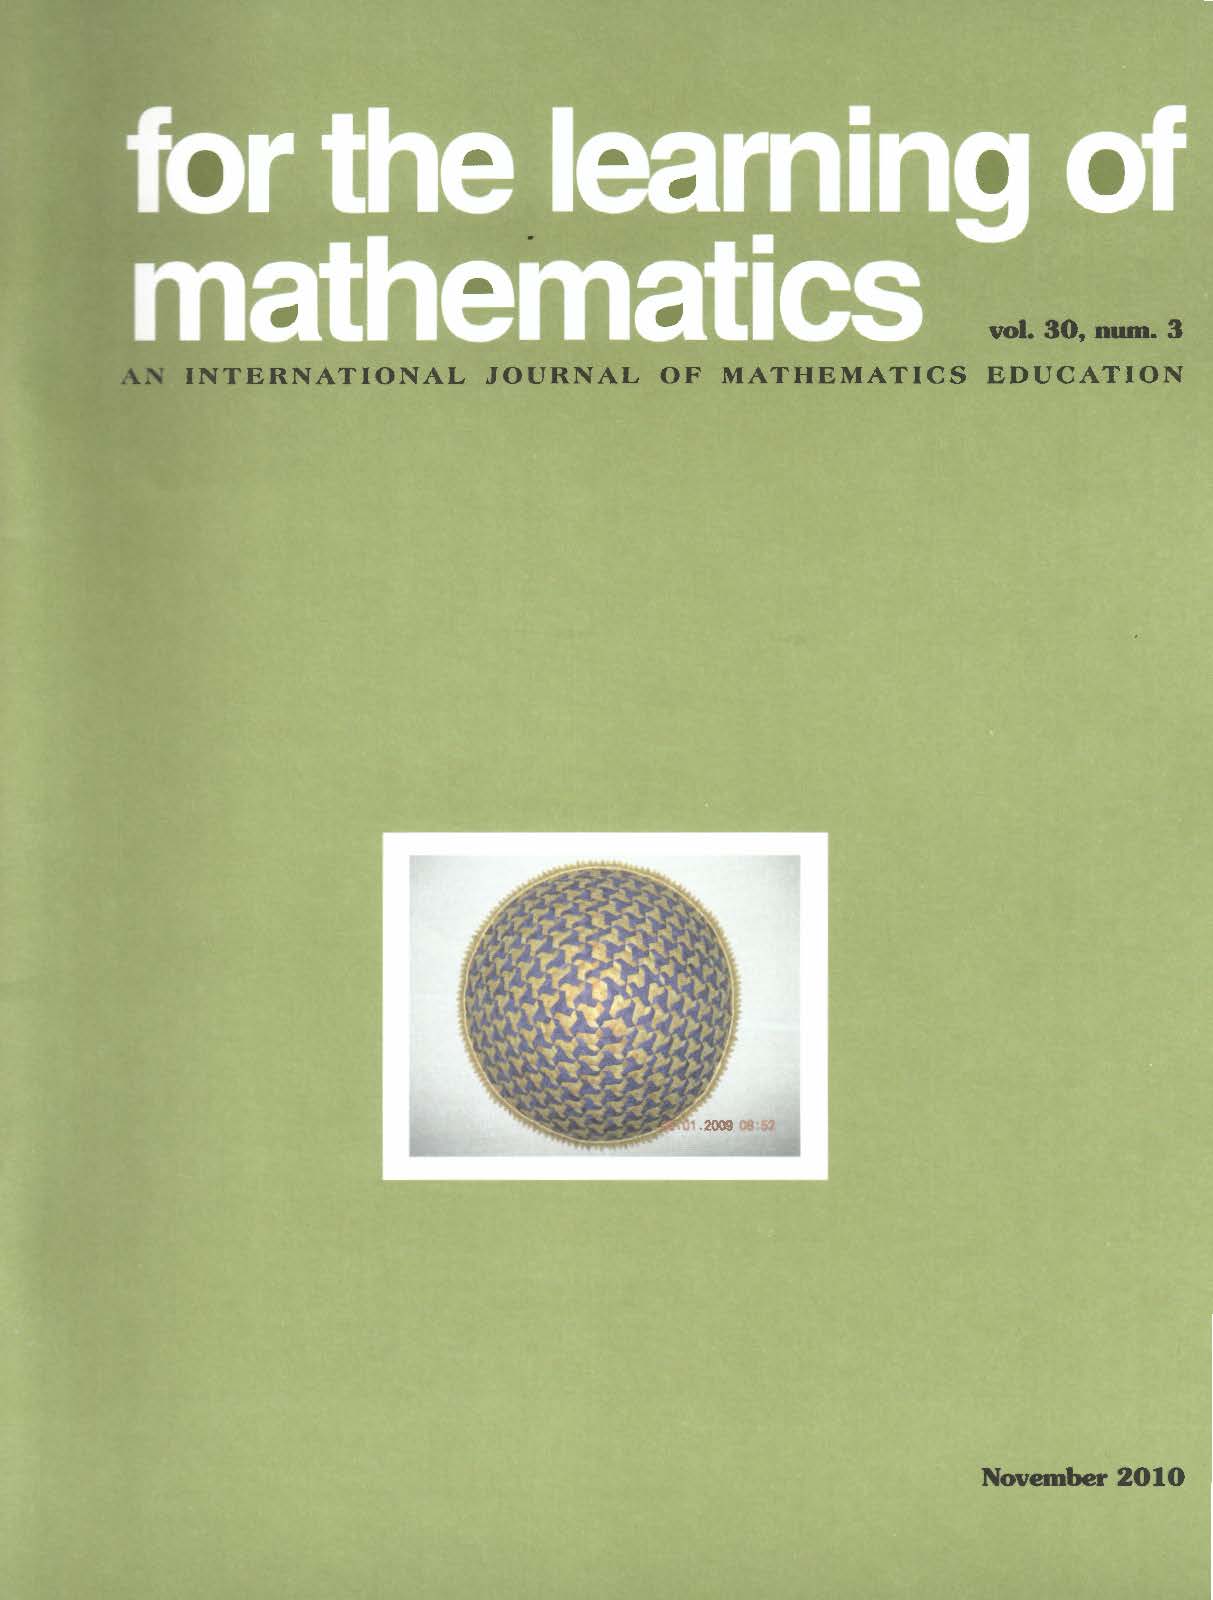 Phd thesis in mathematics